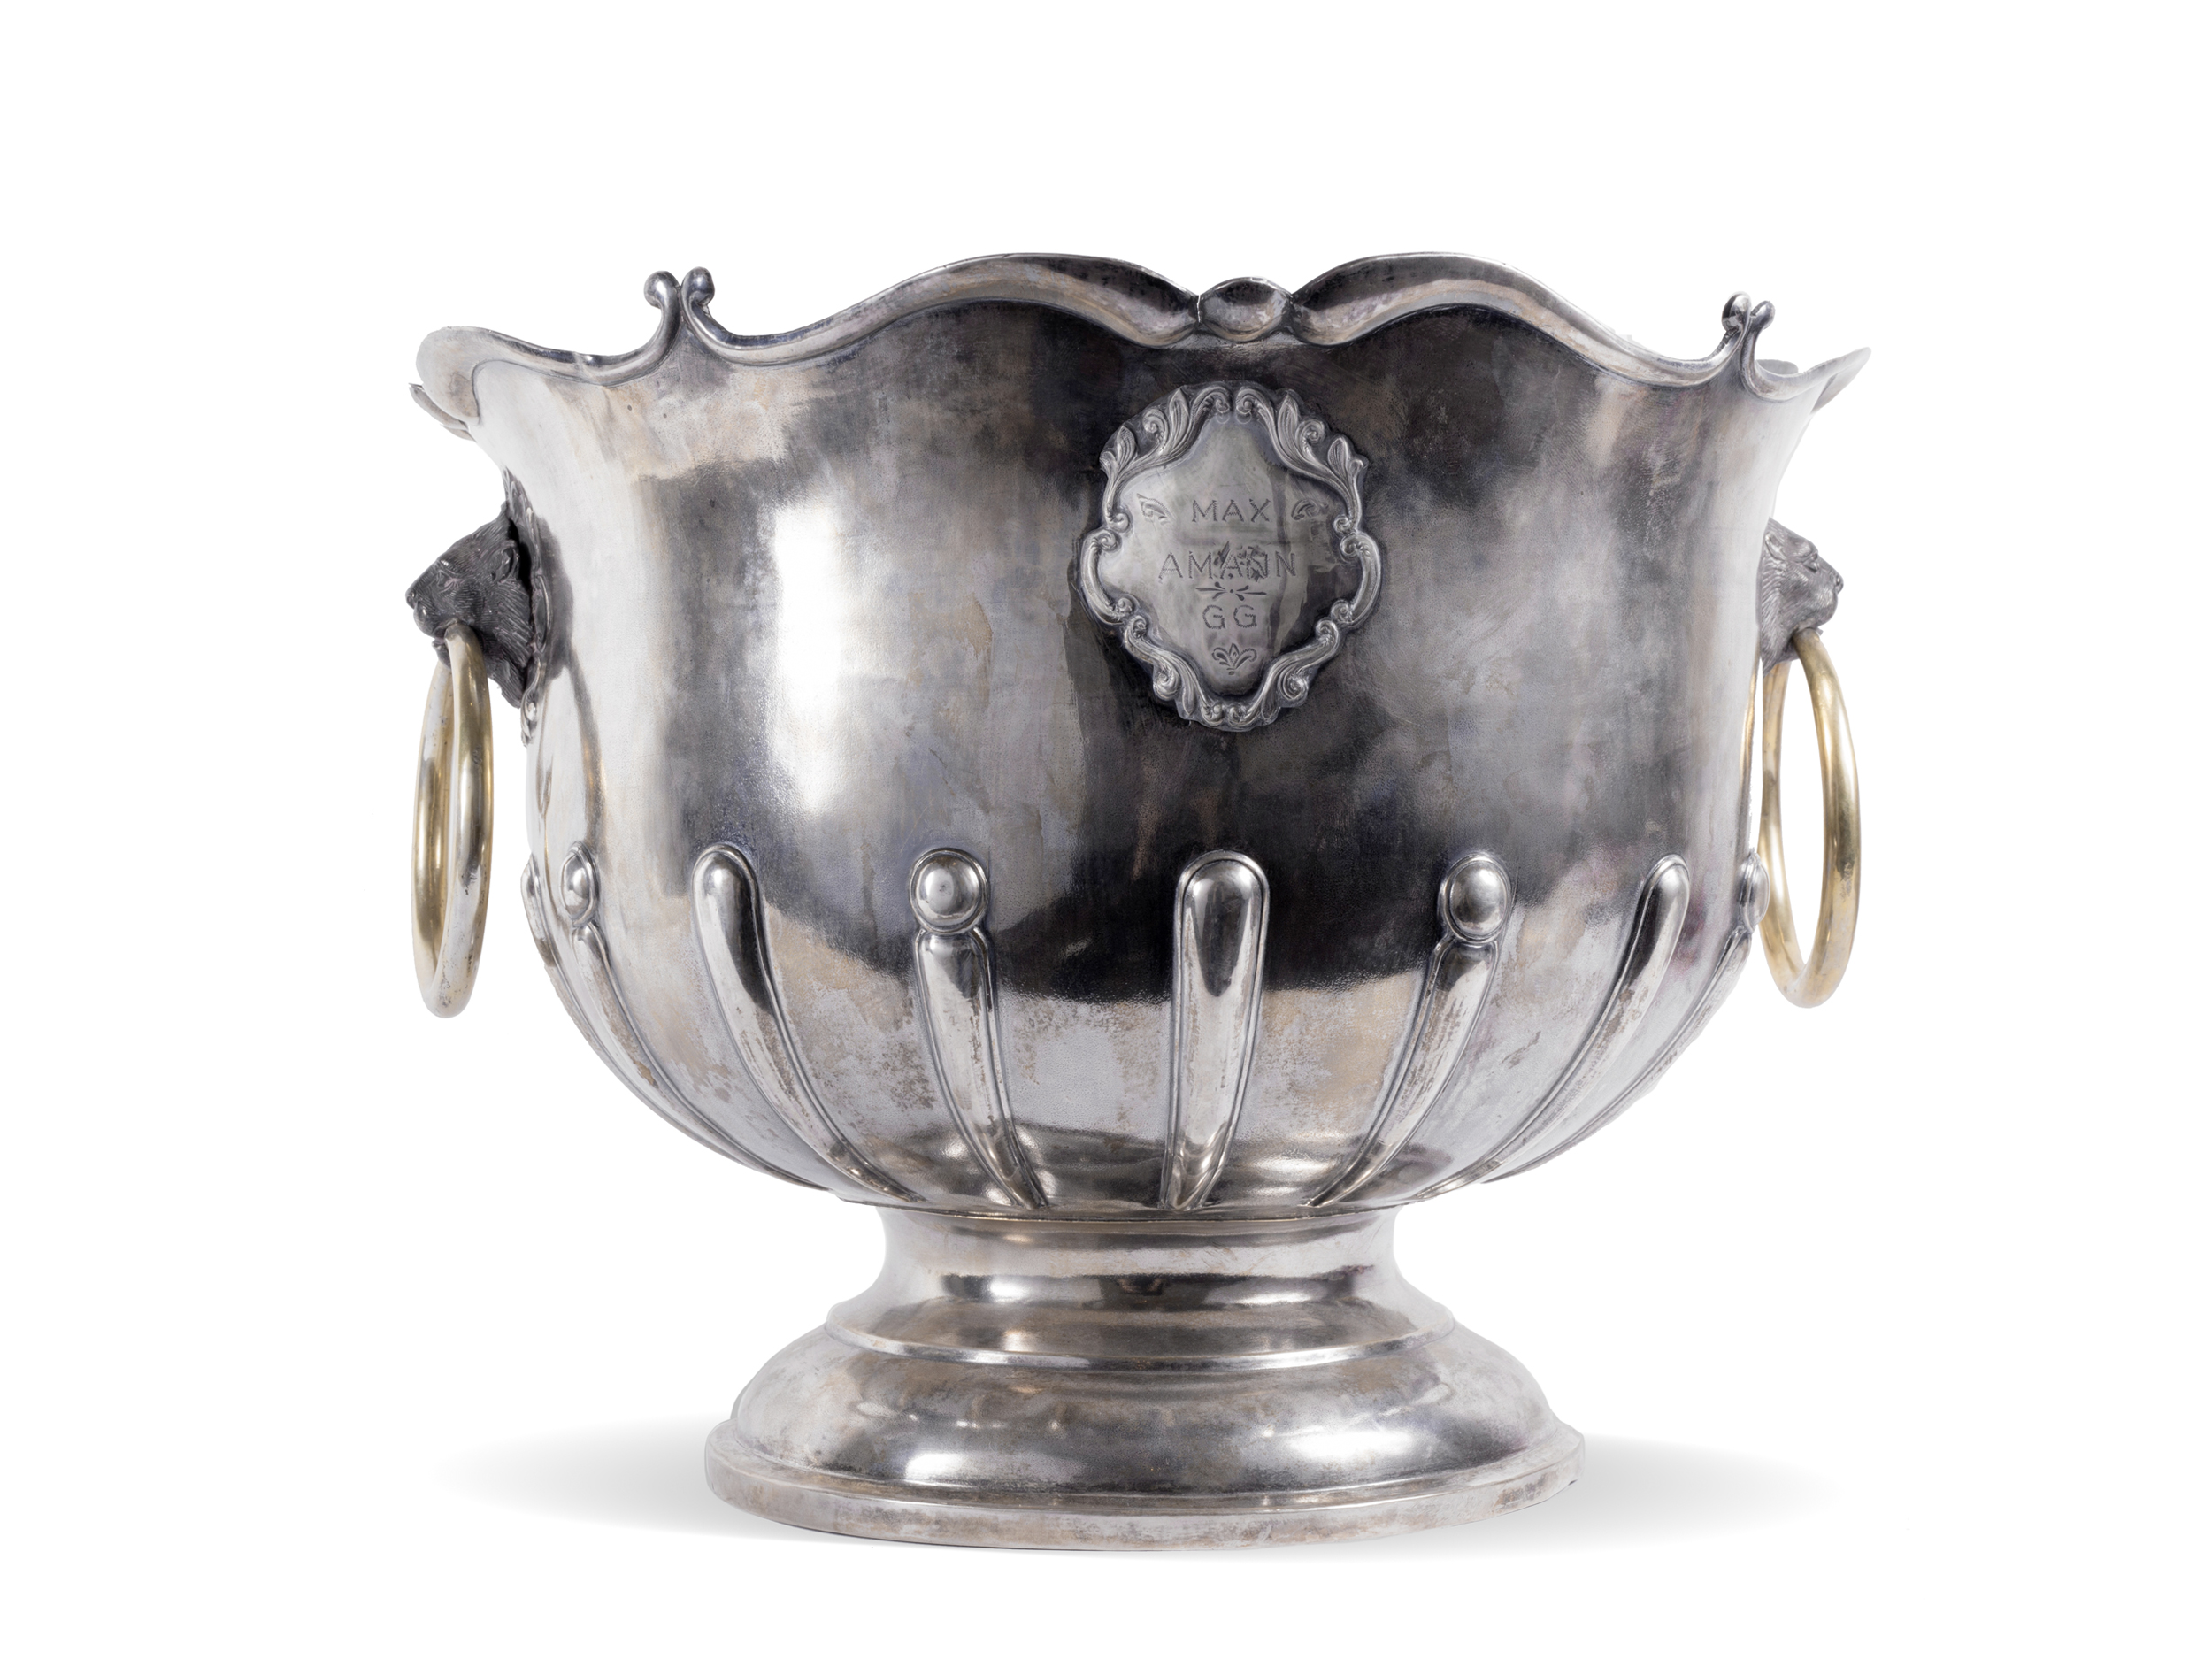 Exclusive champagne or wine cooler, 18th/19th century, Silver cast & chased